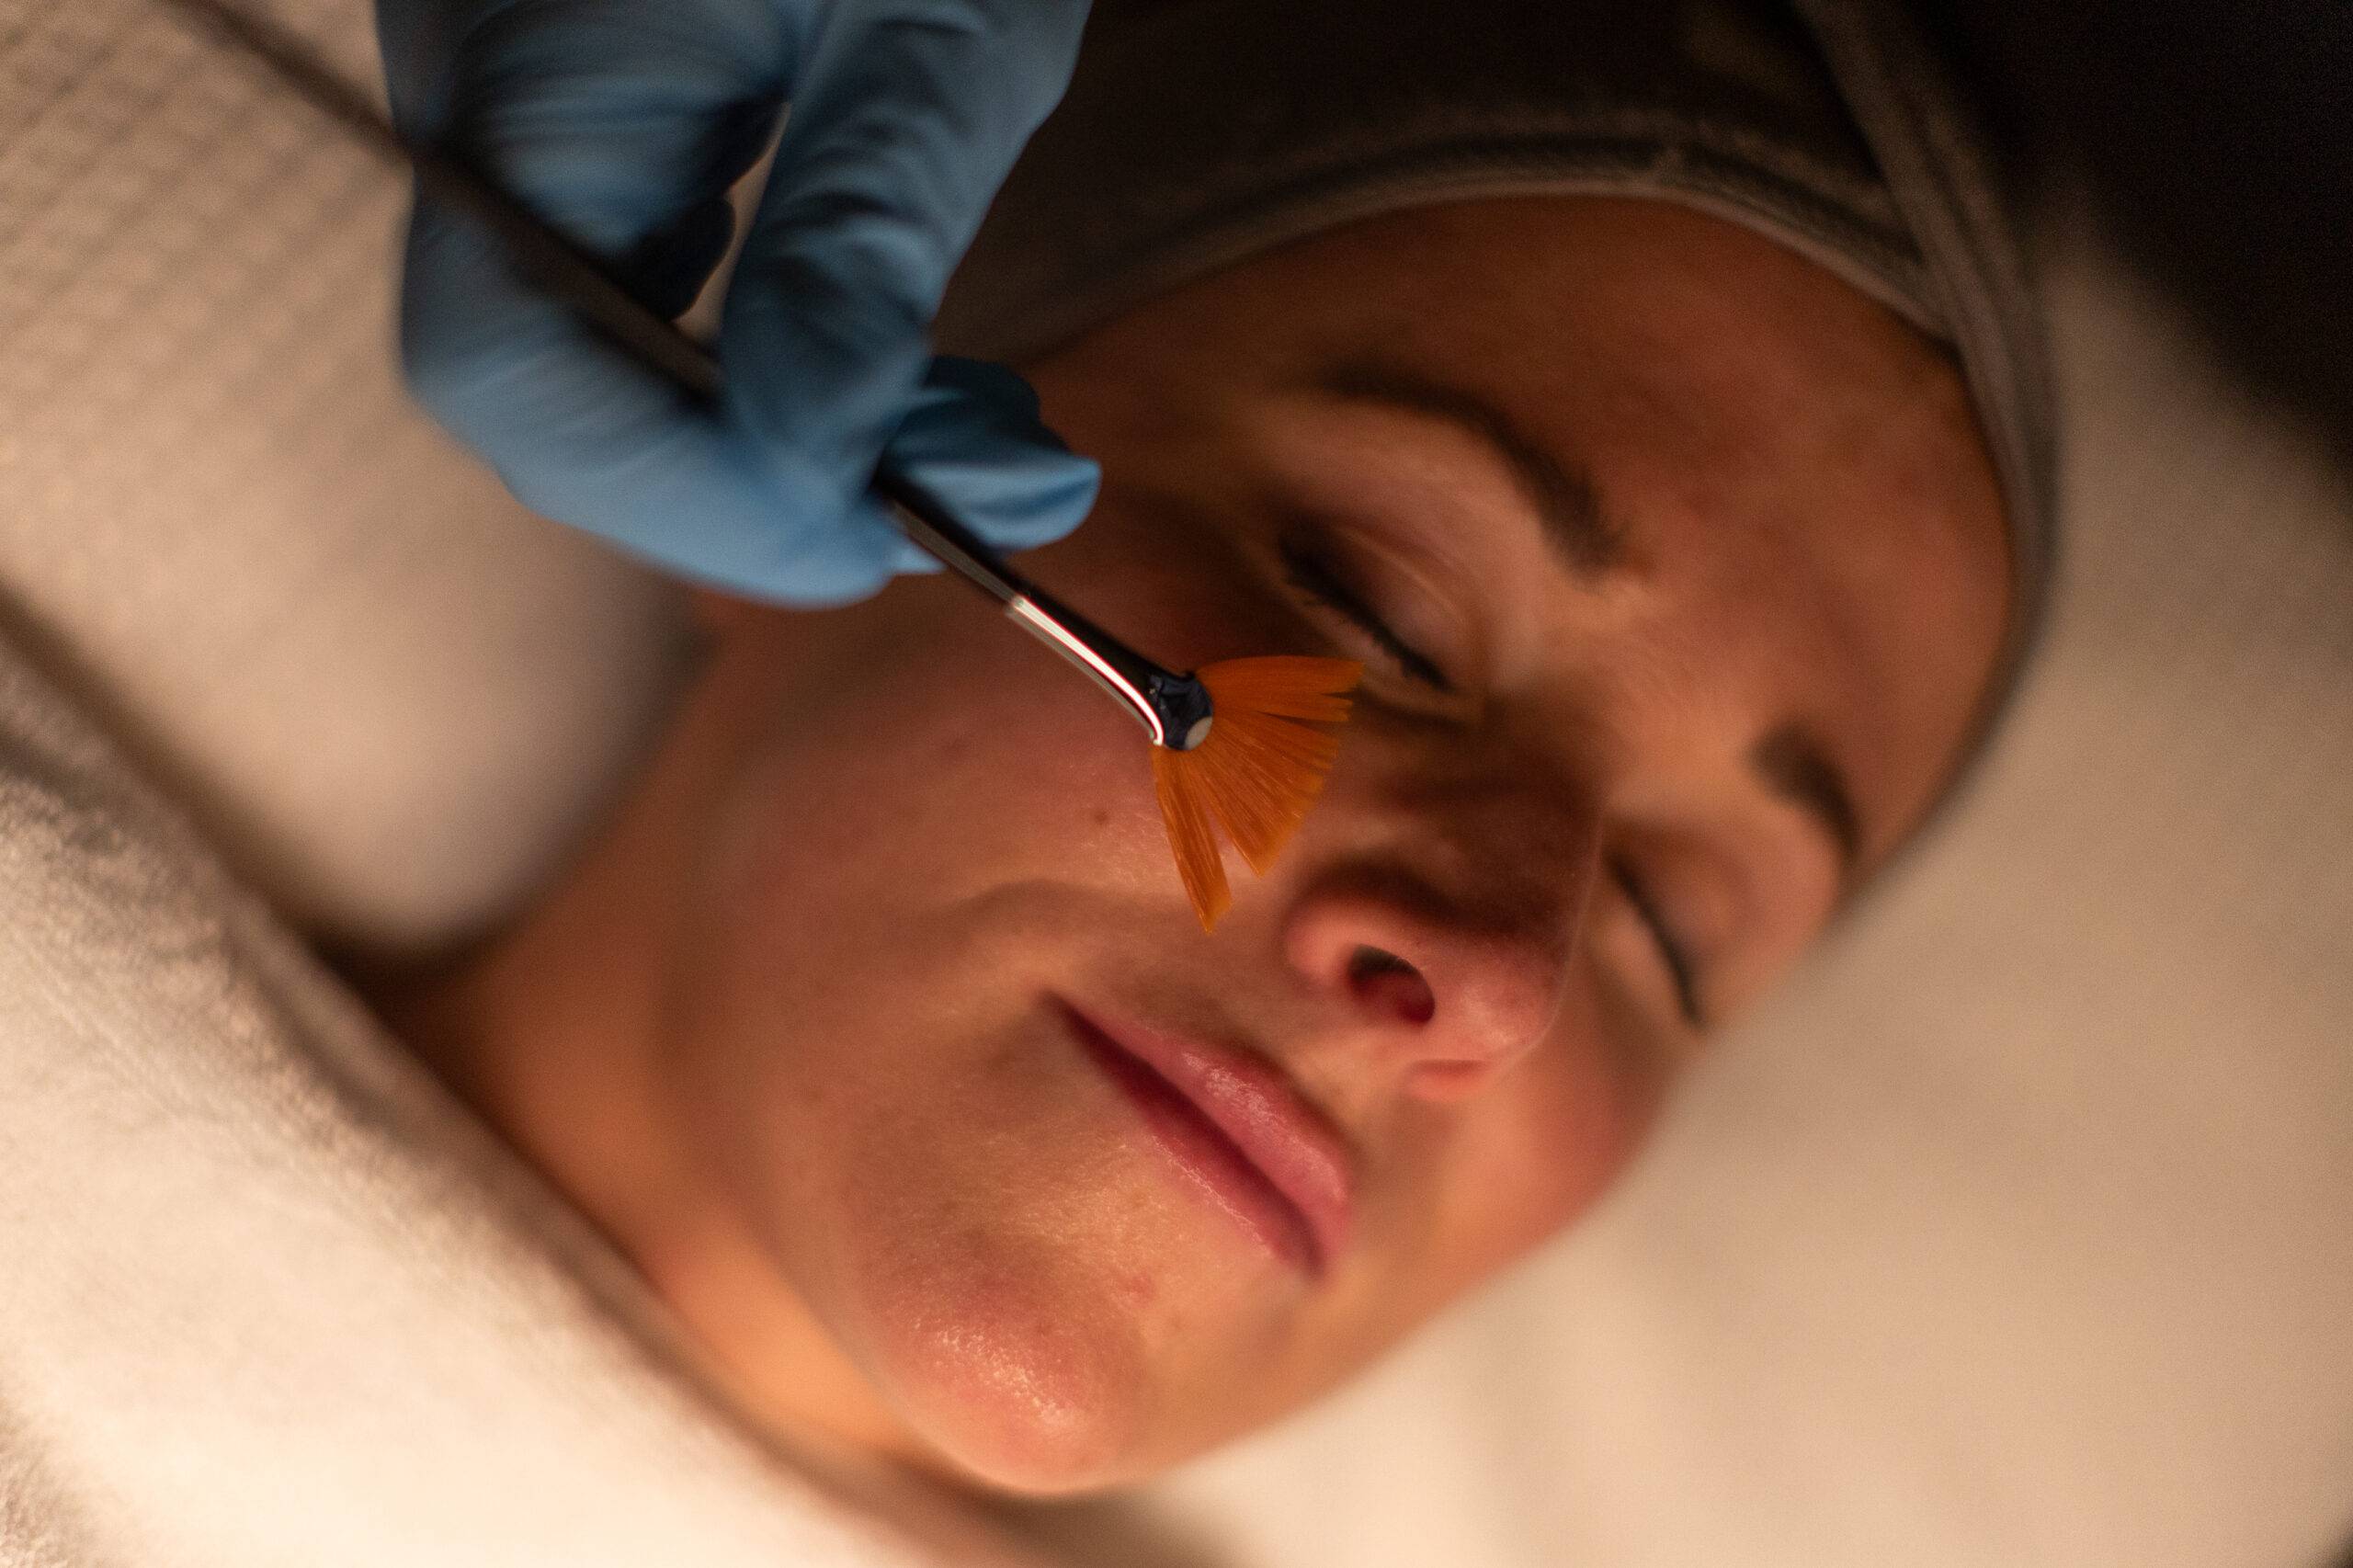 A woman receiving a medifacial treatment, with her eyes closed and a brush applying product to her face. The aesthetician wears blue gloves. The setting is warmly lit, focusing closely on the treatment